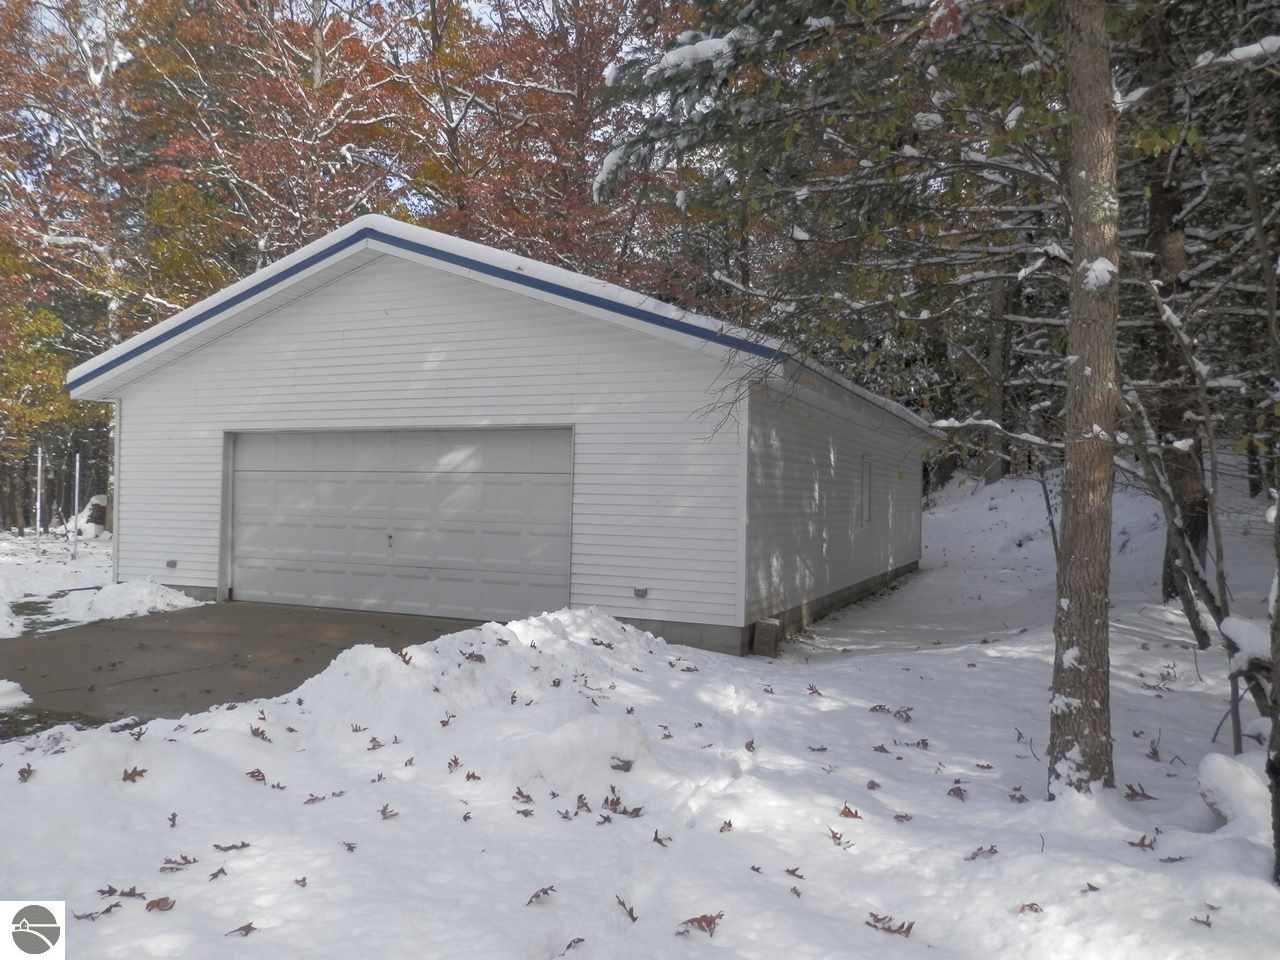 9661 N Kings Point, Irons, MI 49644 photo 36 of 45